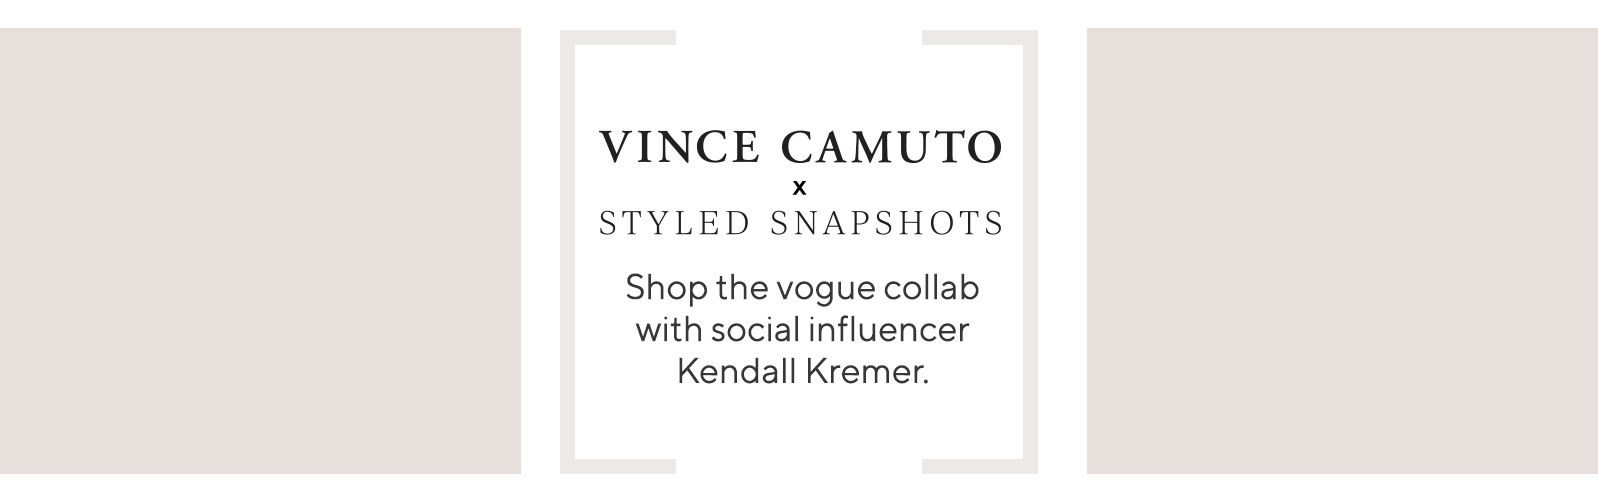 Vince Camuto x Styled Snapshots -  Shop the vogue collab with social influencer Kendall Kremer.